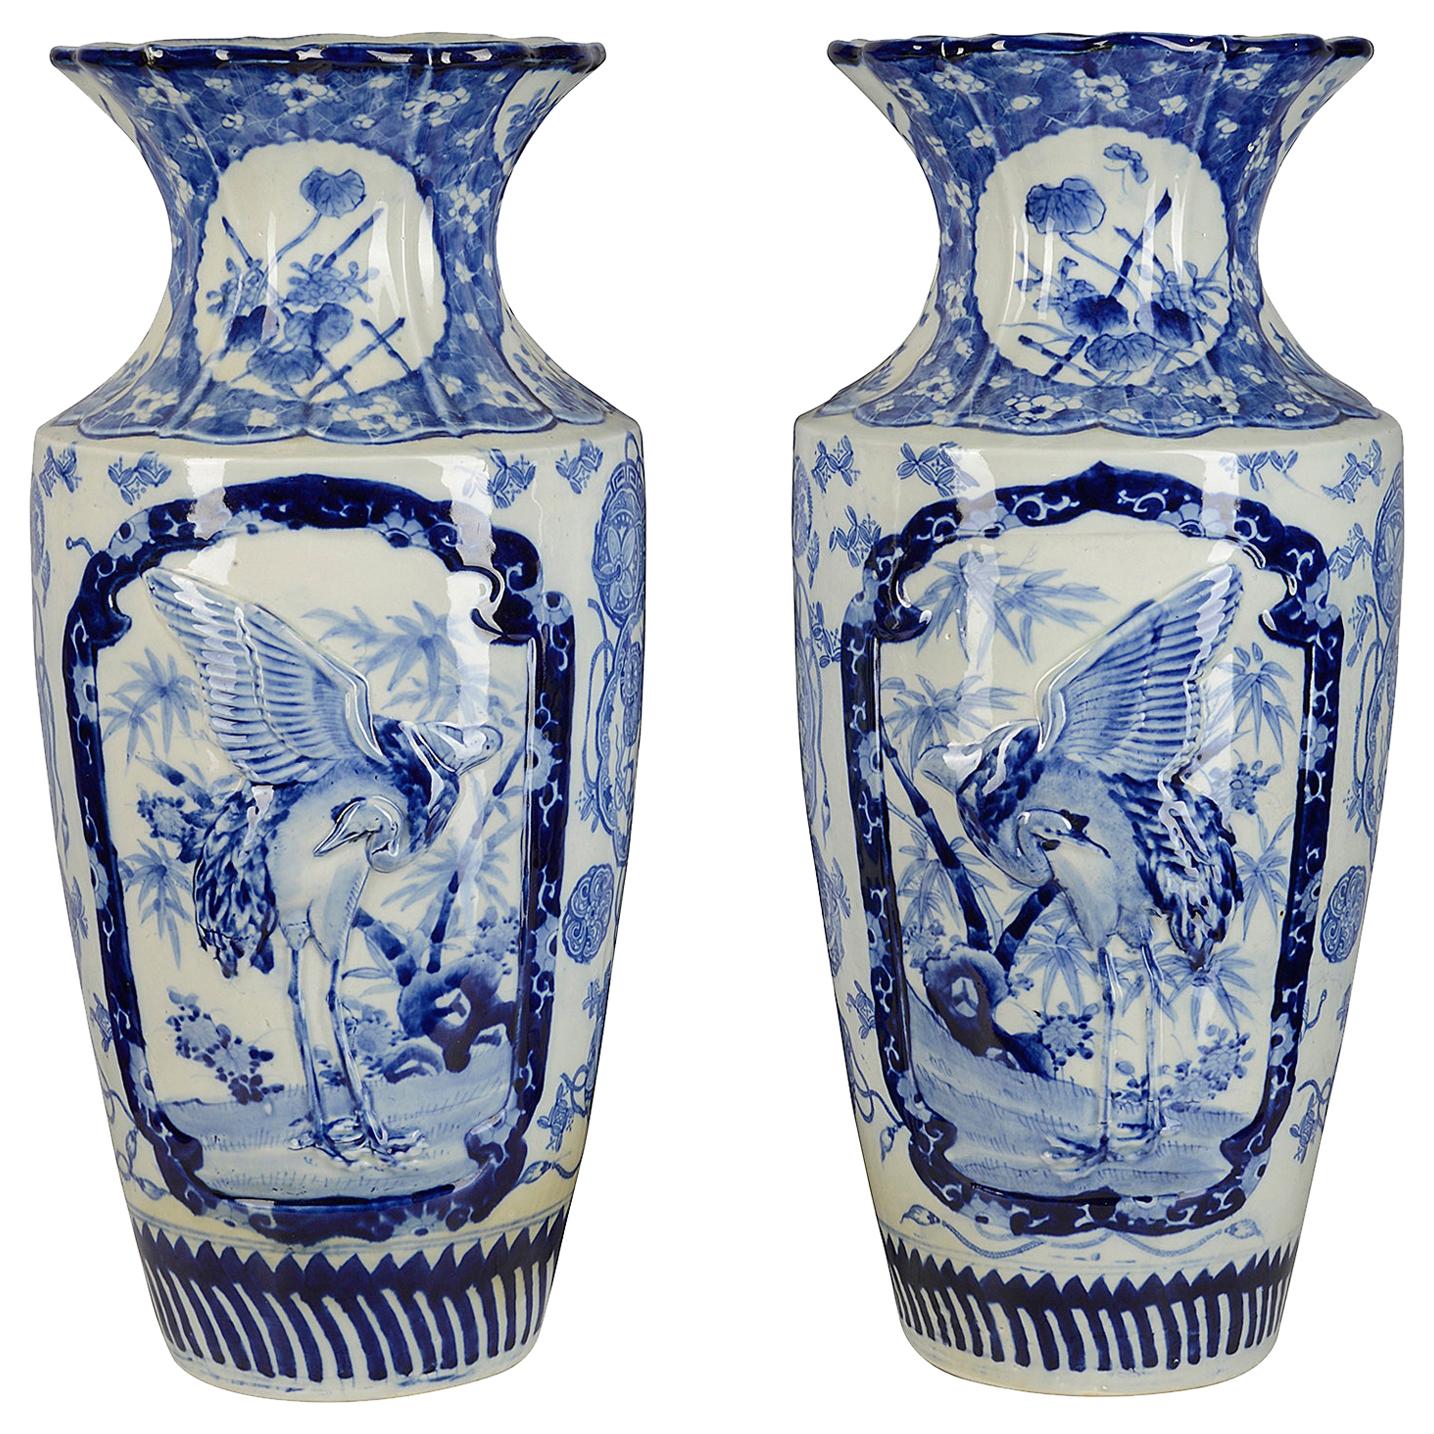 Large Pair of Japanese Blue and White Vases, circa 1890